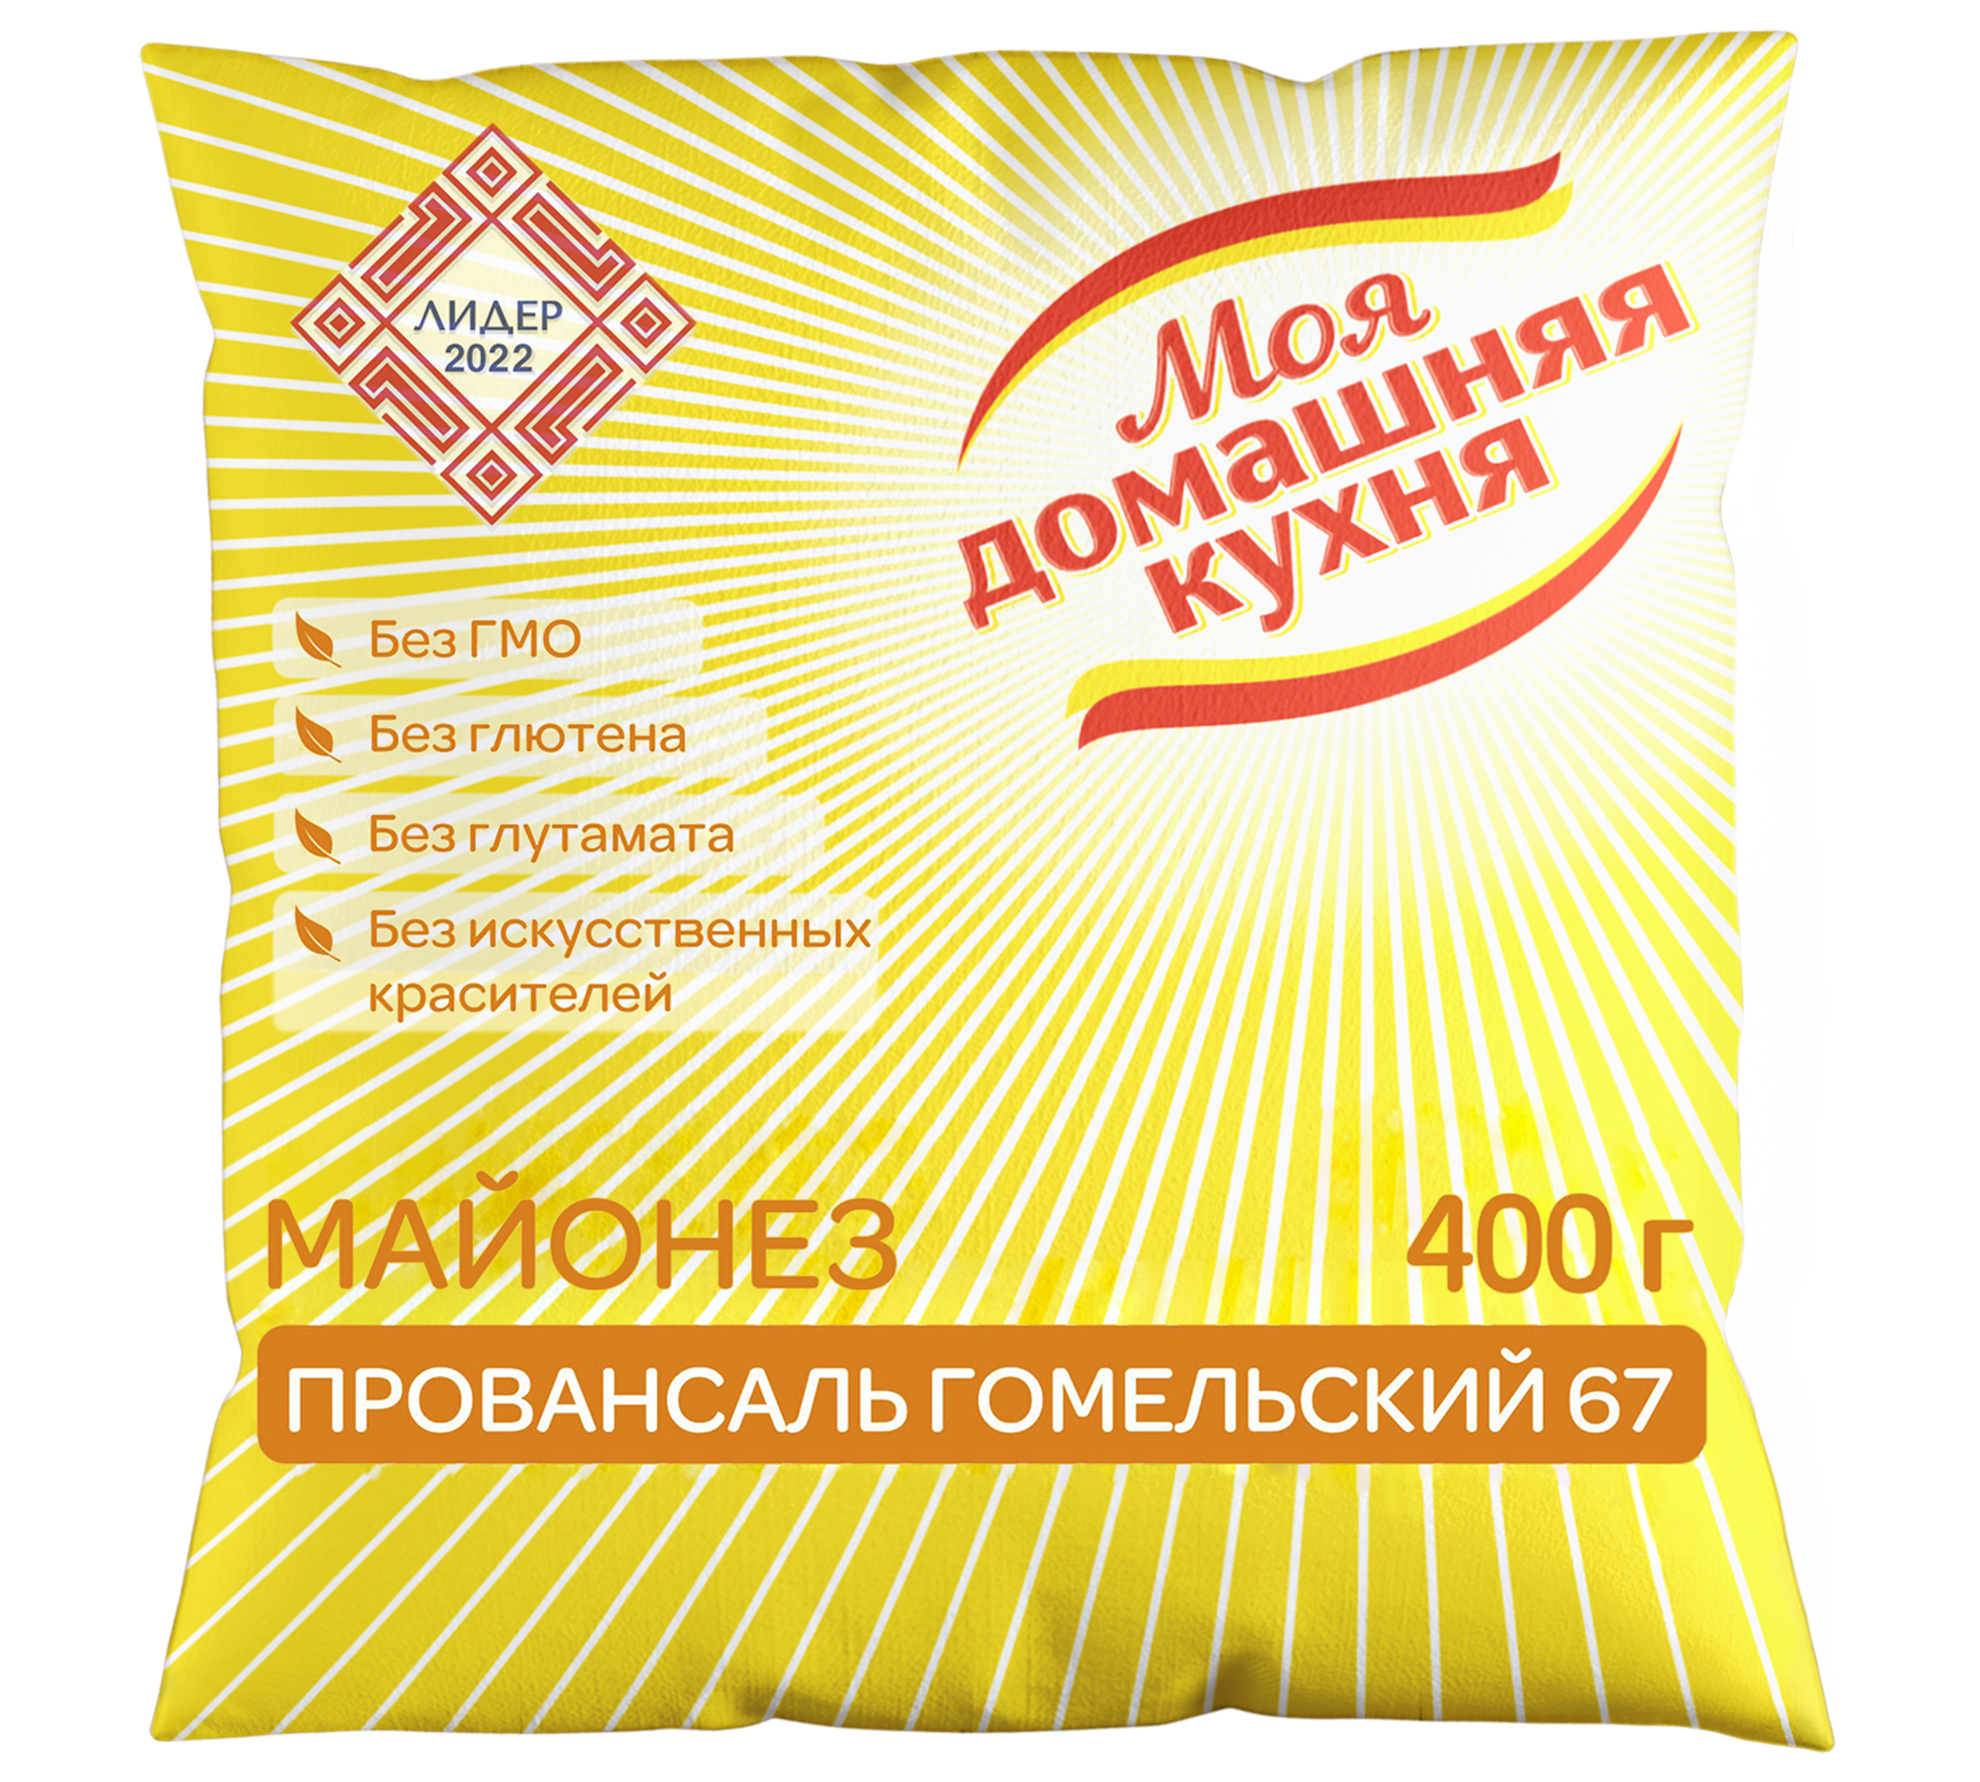 Mayonnaise Provansal Gomelsky 67 wholesale from the manufacturer